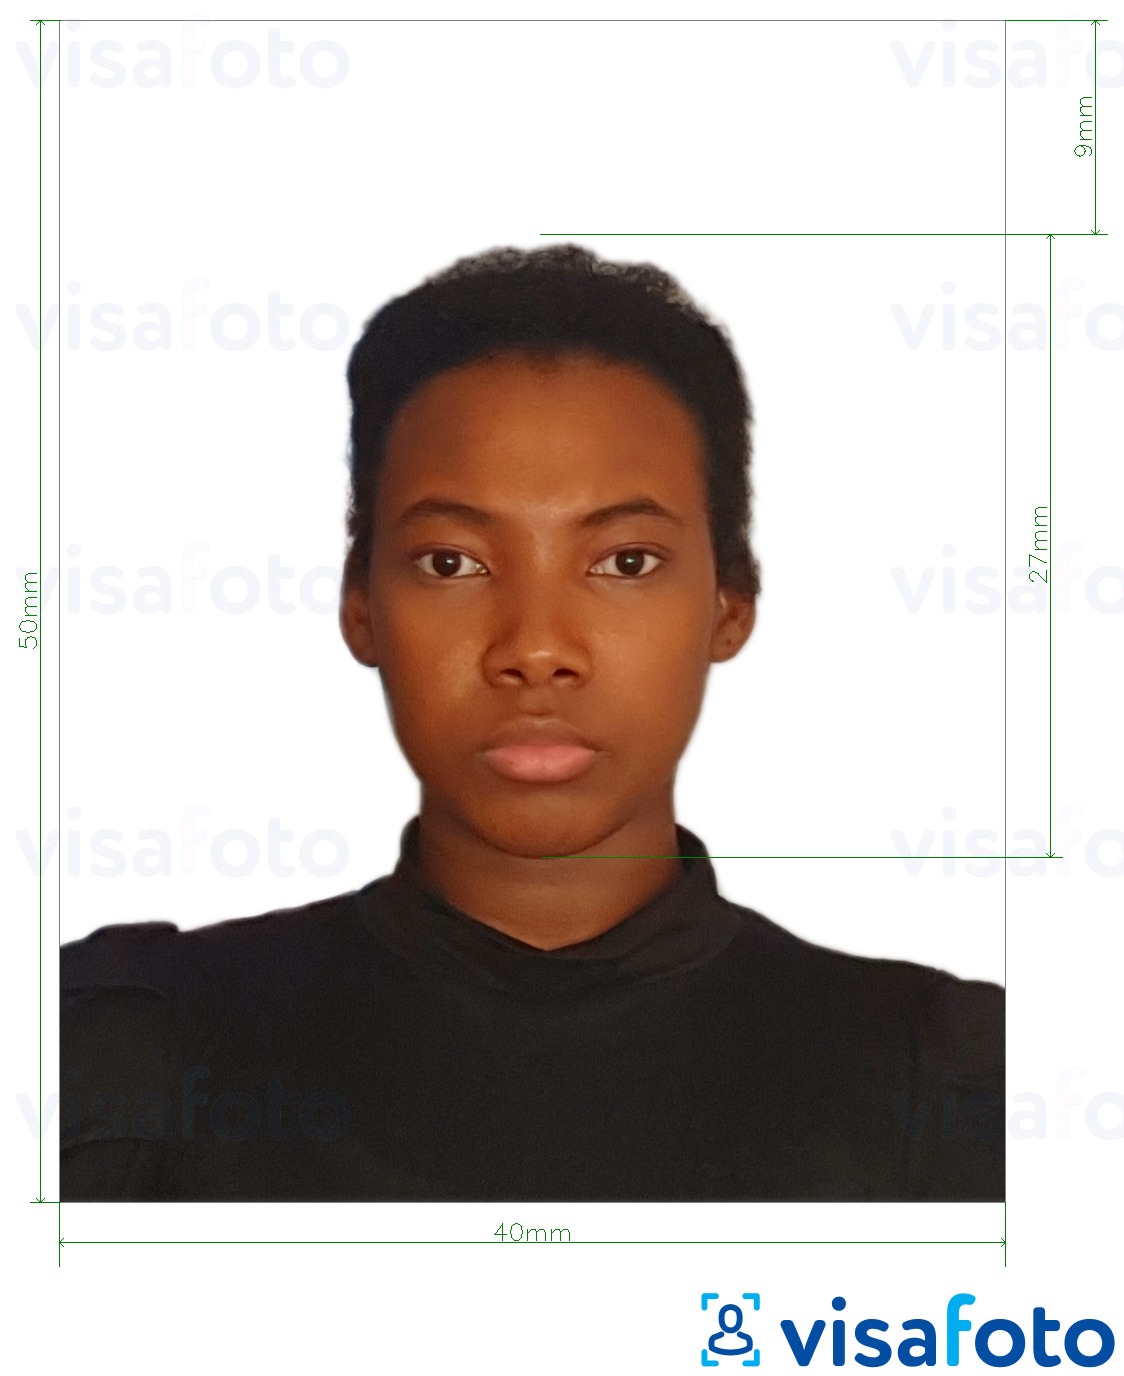 Example of photo for Colombia ID card 4x5 cm with exact size specification